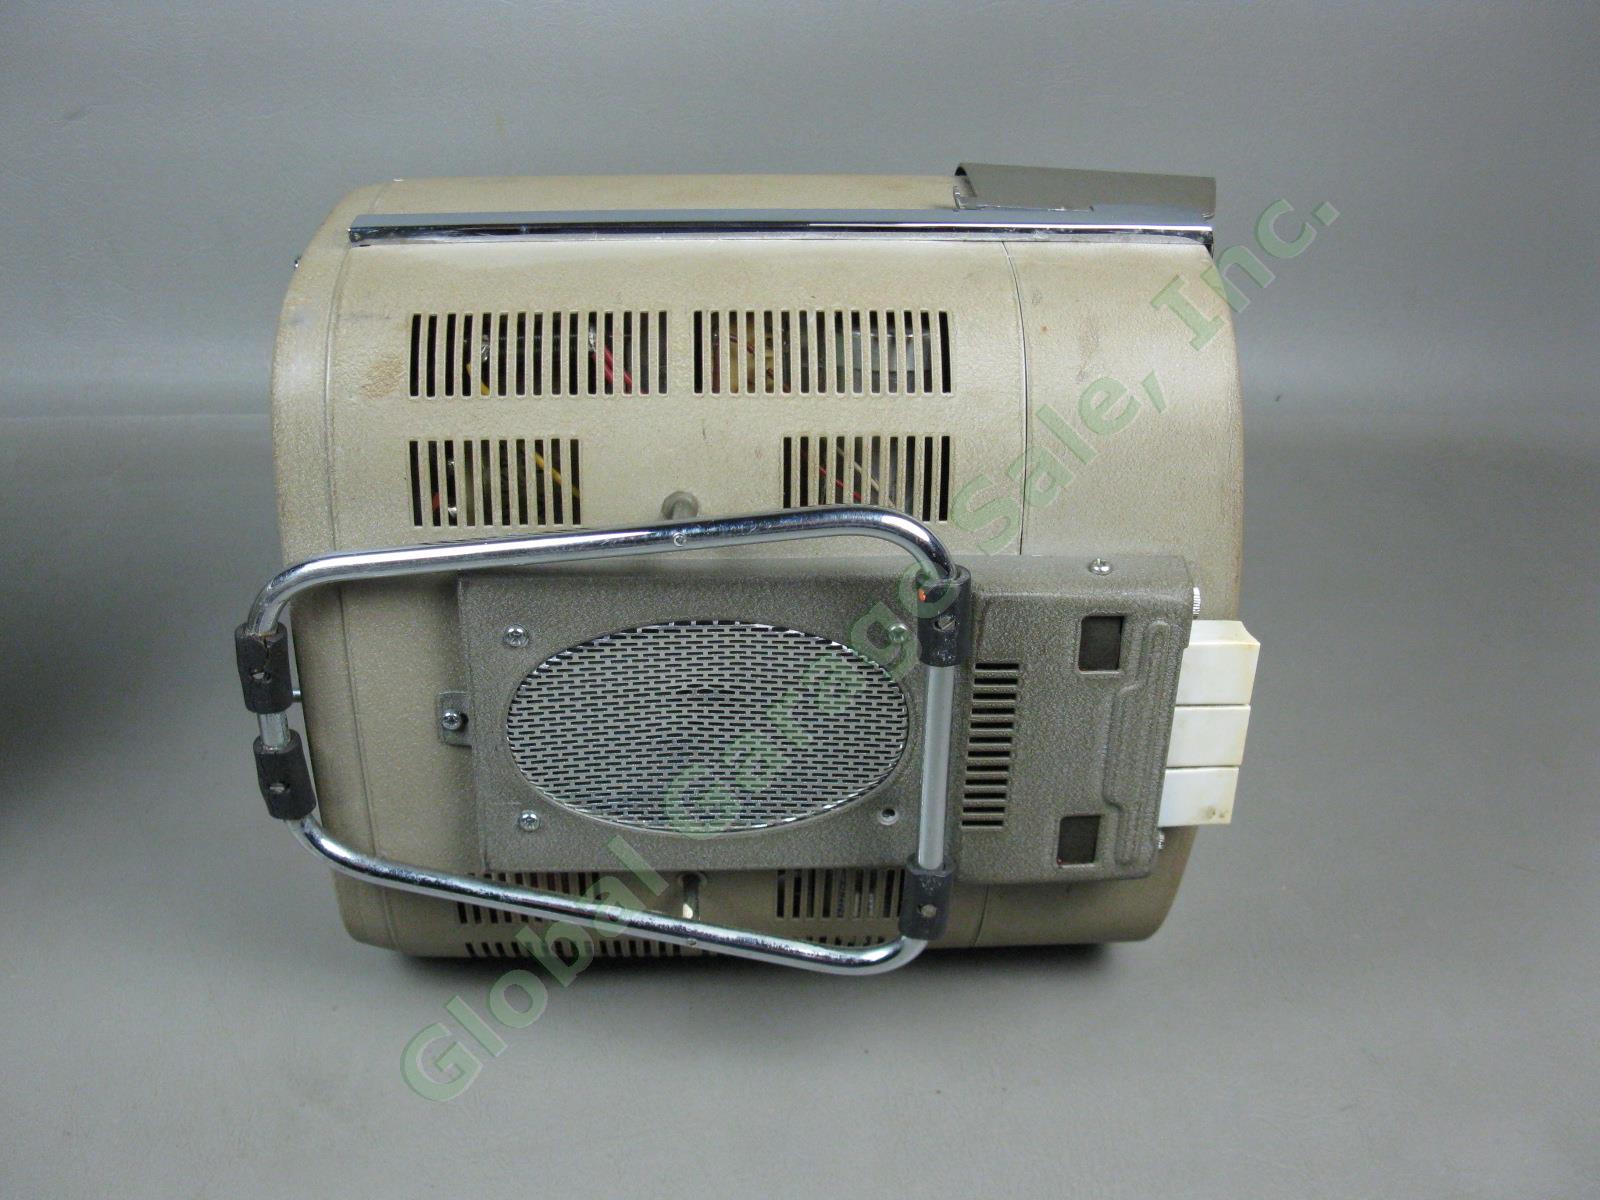 Rare Vtg 1961 Sony 8-301W 1st Portable Television Space Age TV Receiver Bundle 6